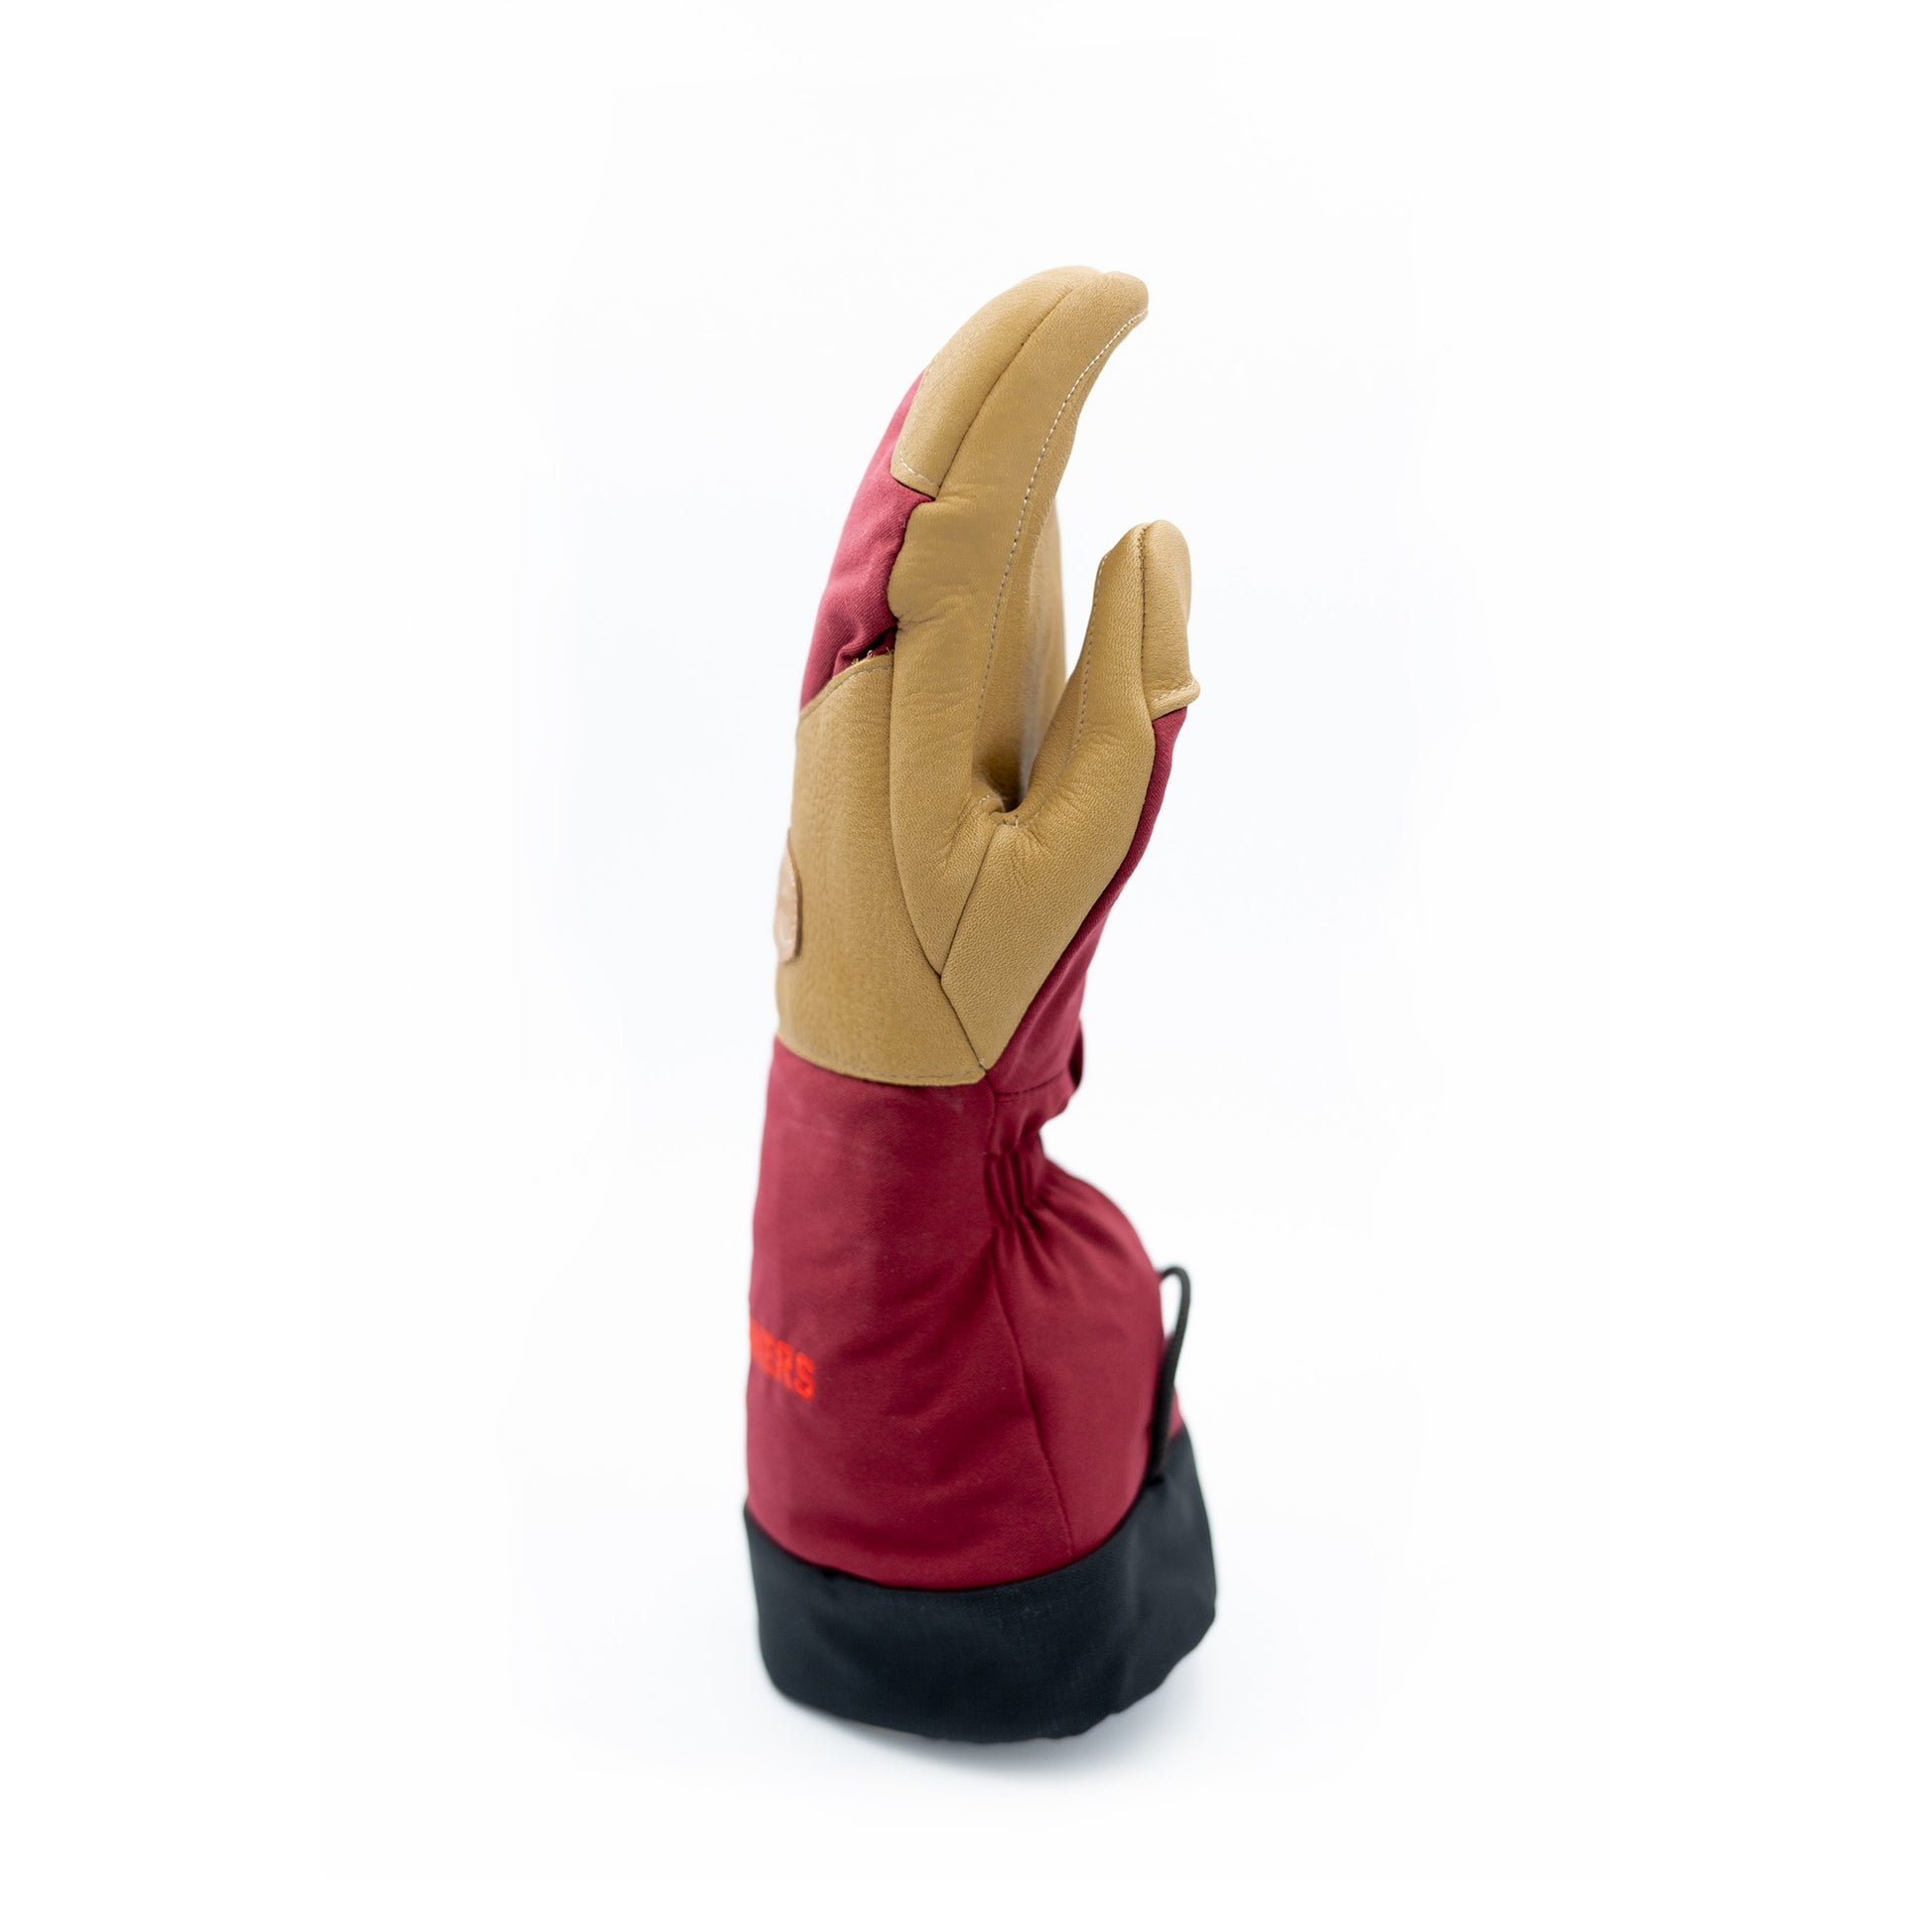 A red and tan Mainers Mitts on a white background, known for its durability.